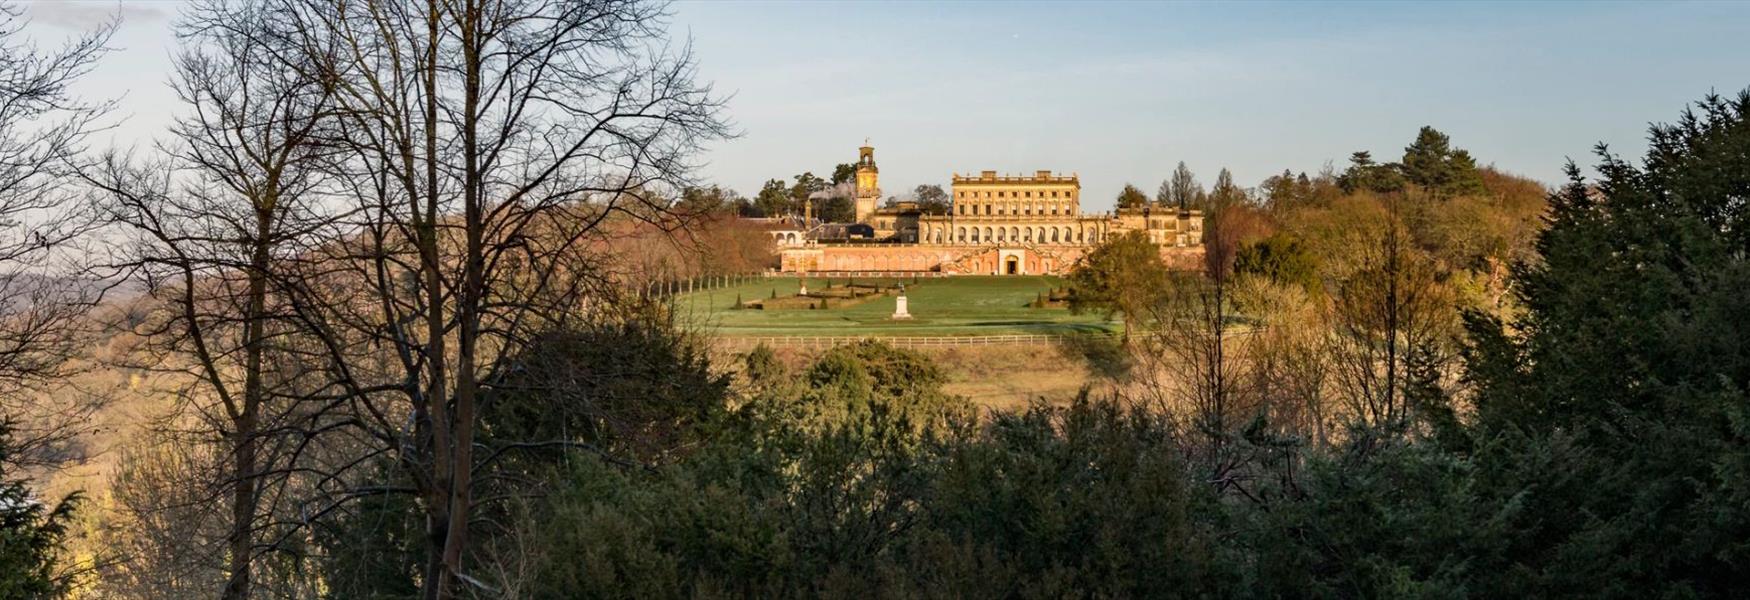 A view of Cliveden House from the woodlands